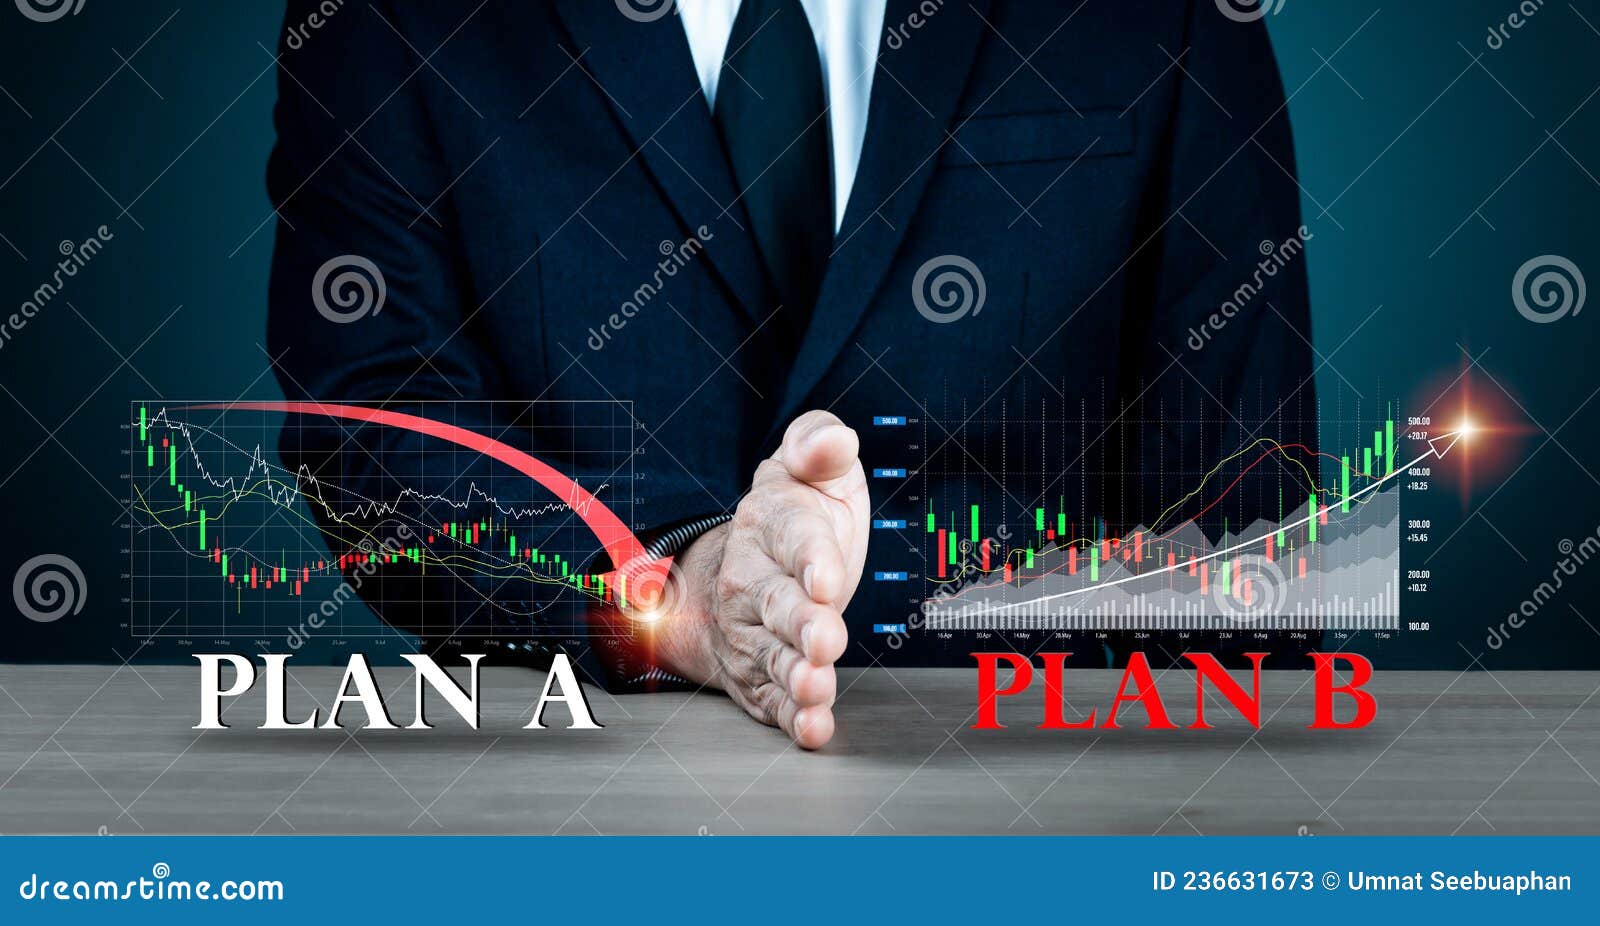 a businessman's hand obstructs plan a. plan b wording on the table backdrop has been changed.  such as strategy.